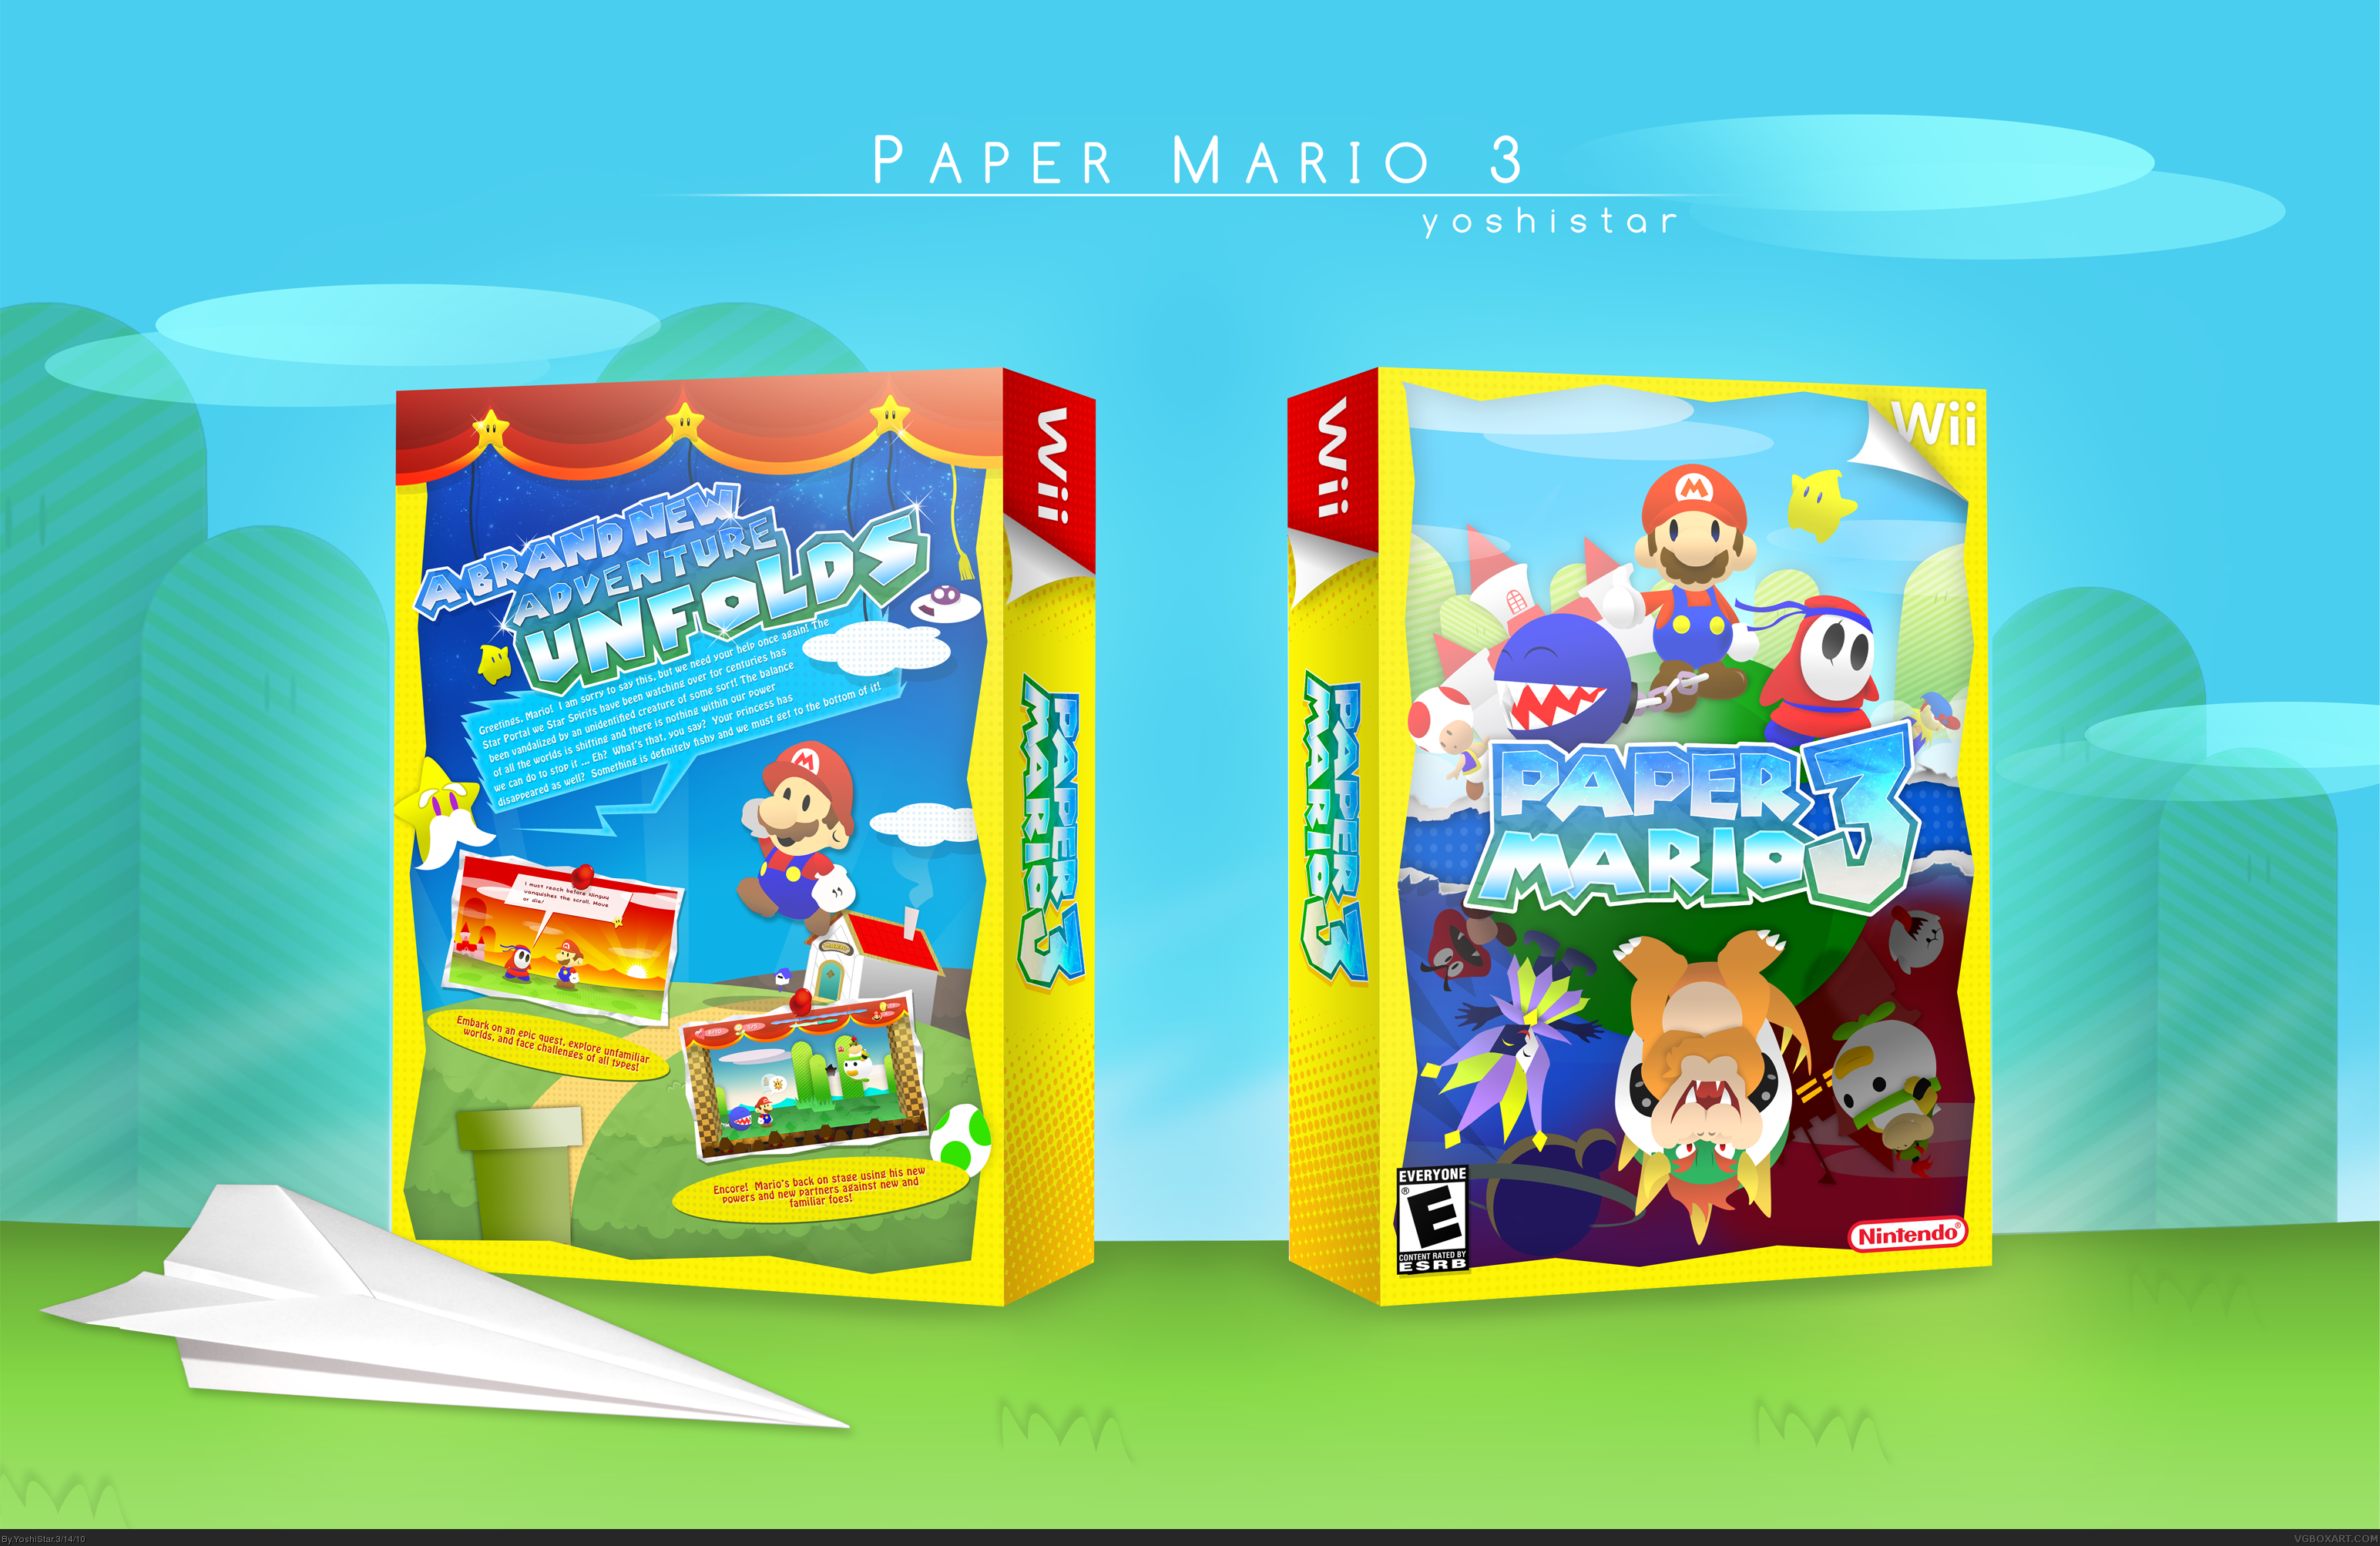 viewing-full-size-paper-mario-3-box-cover